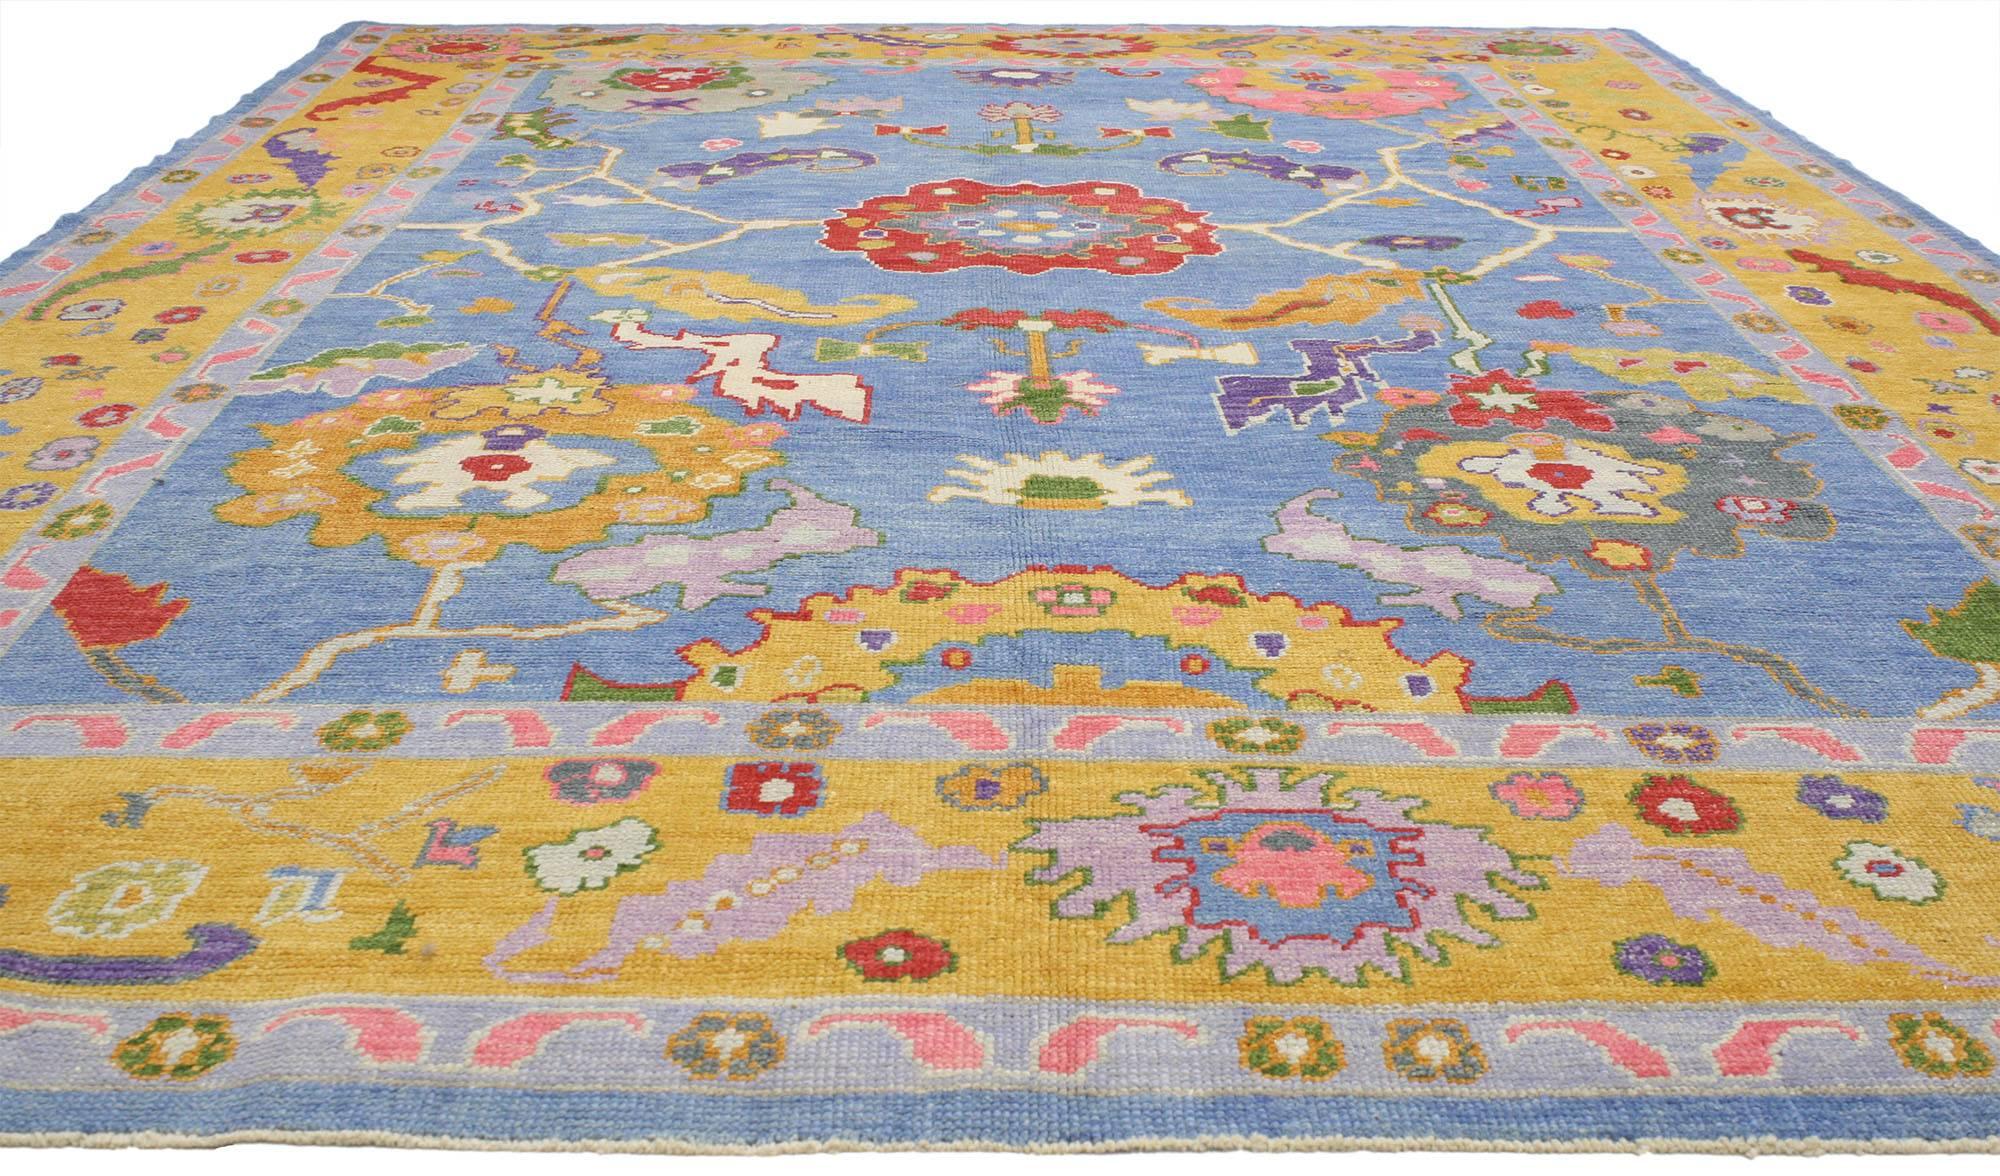 52232, contemporary Turkish Oushak rug with modern style. This contemporary Turkish Oushak rug with modern style is a pleasant surprise for those who waver between traditional and modern taste. This vibrant Oushak rug features large-scale abstract